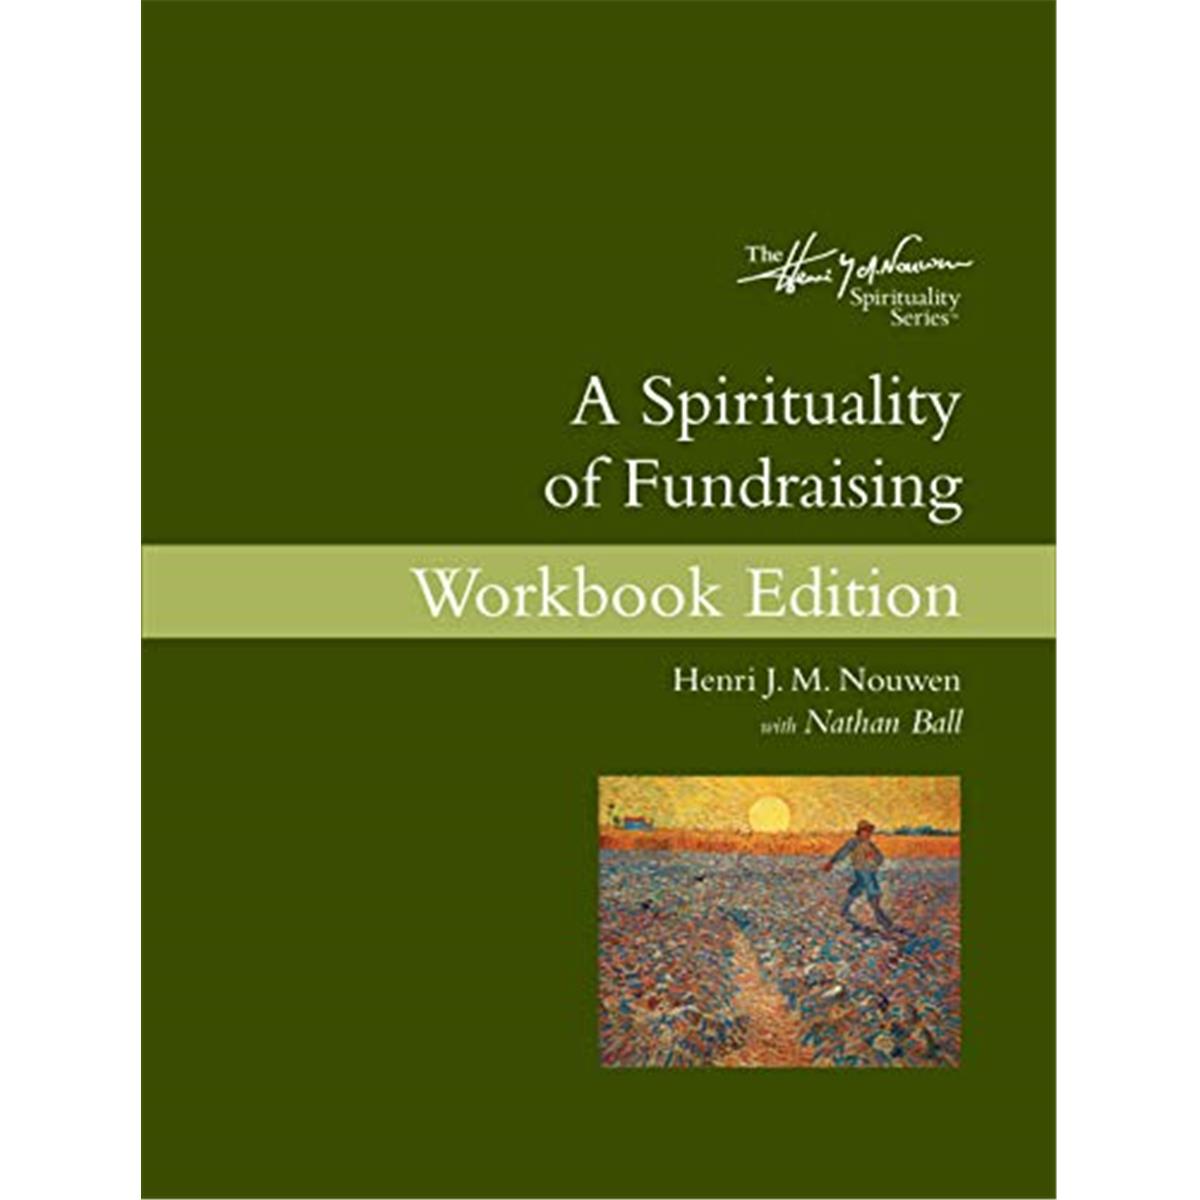 157392 A Spirituality Of Fundraising - Workbook Edition